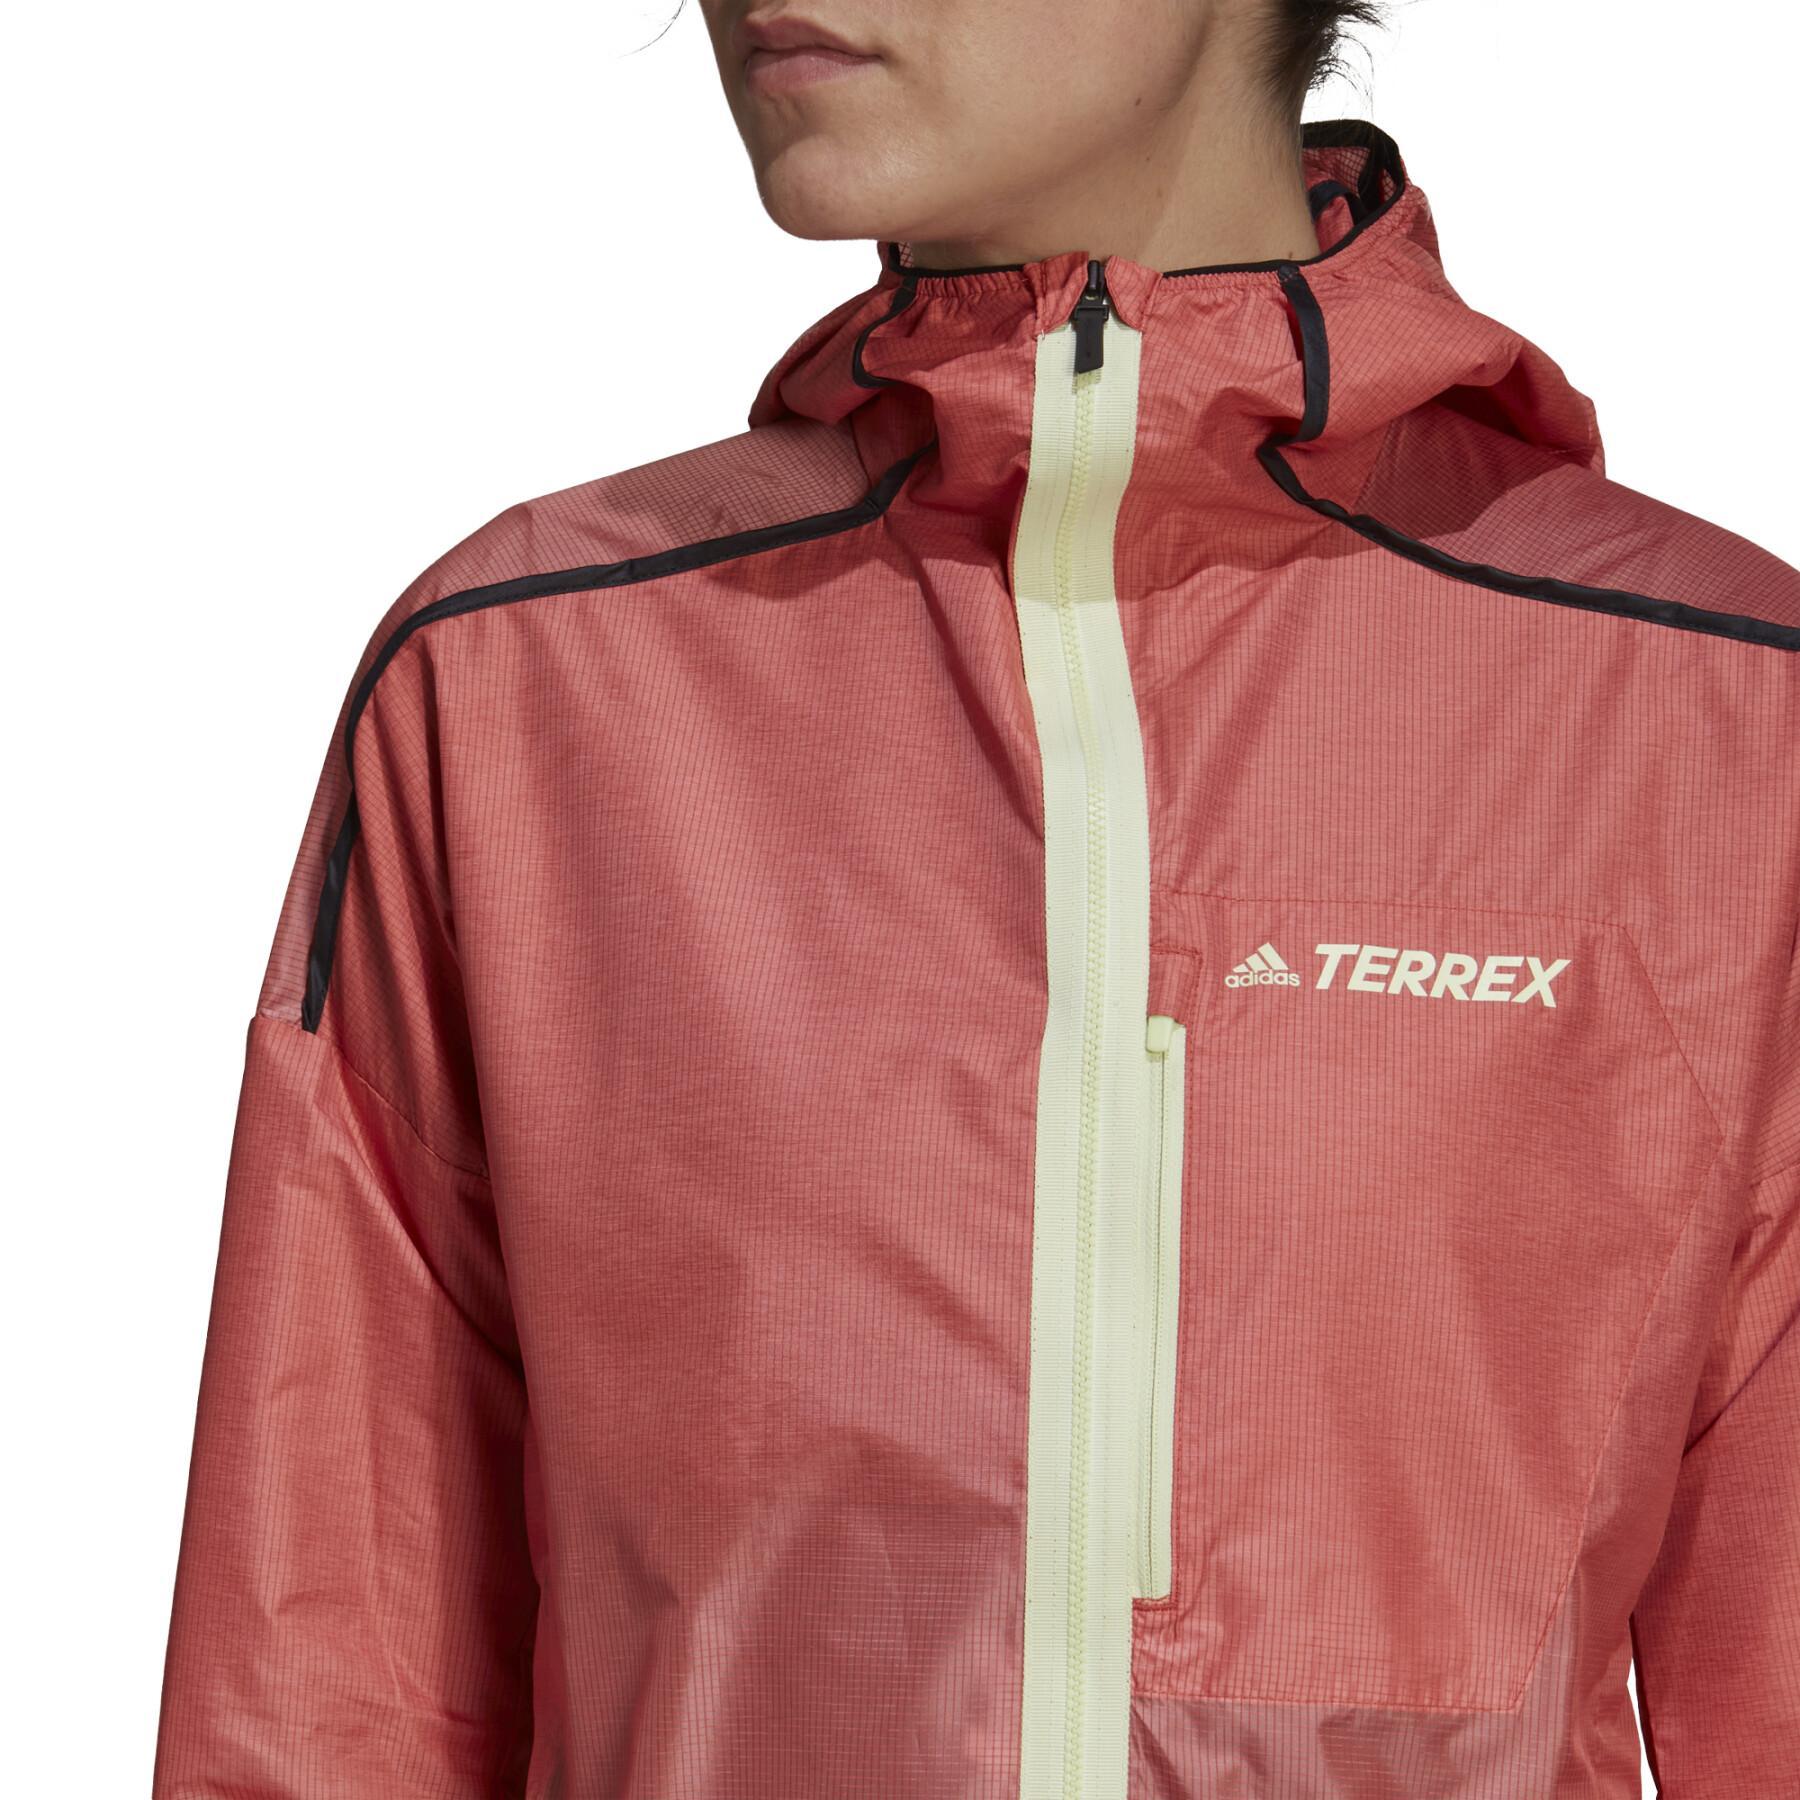 Chaqueta impermeable para mujer adidas Terrex Agravic Windweave